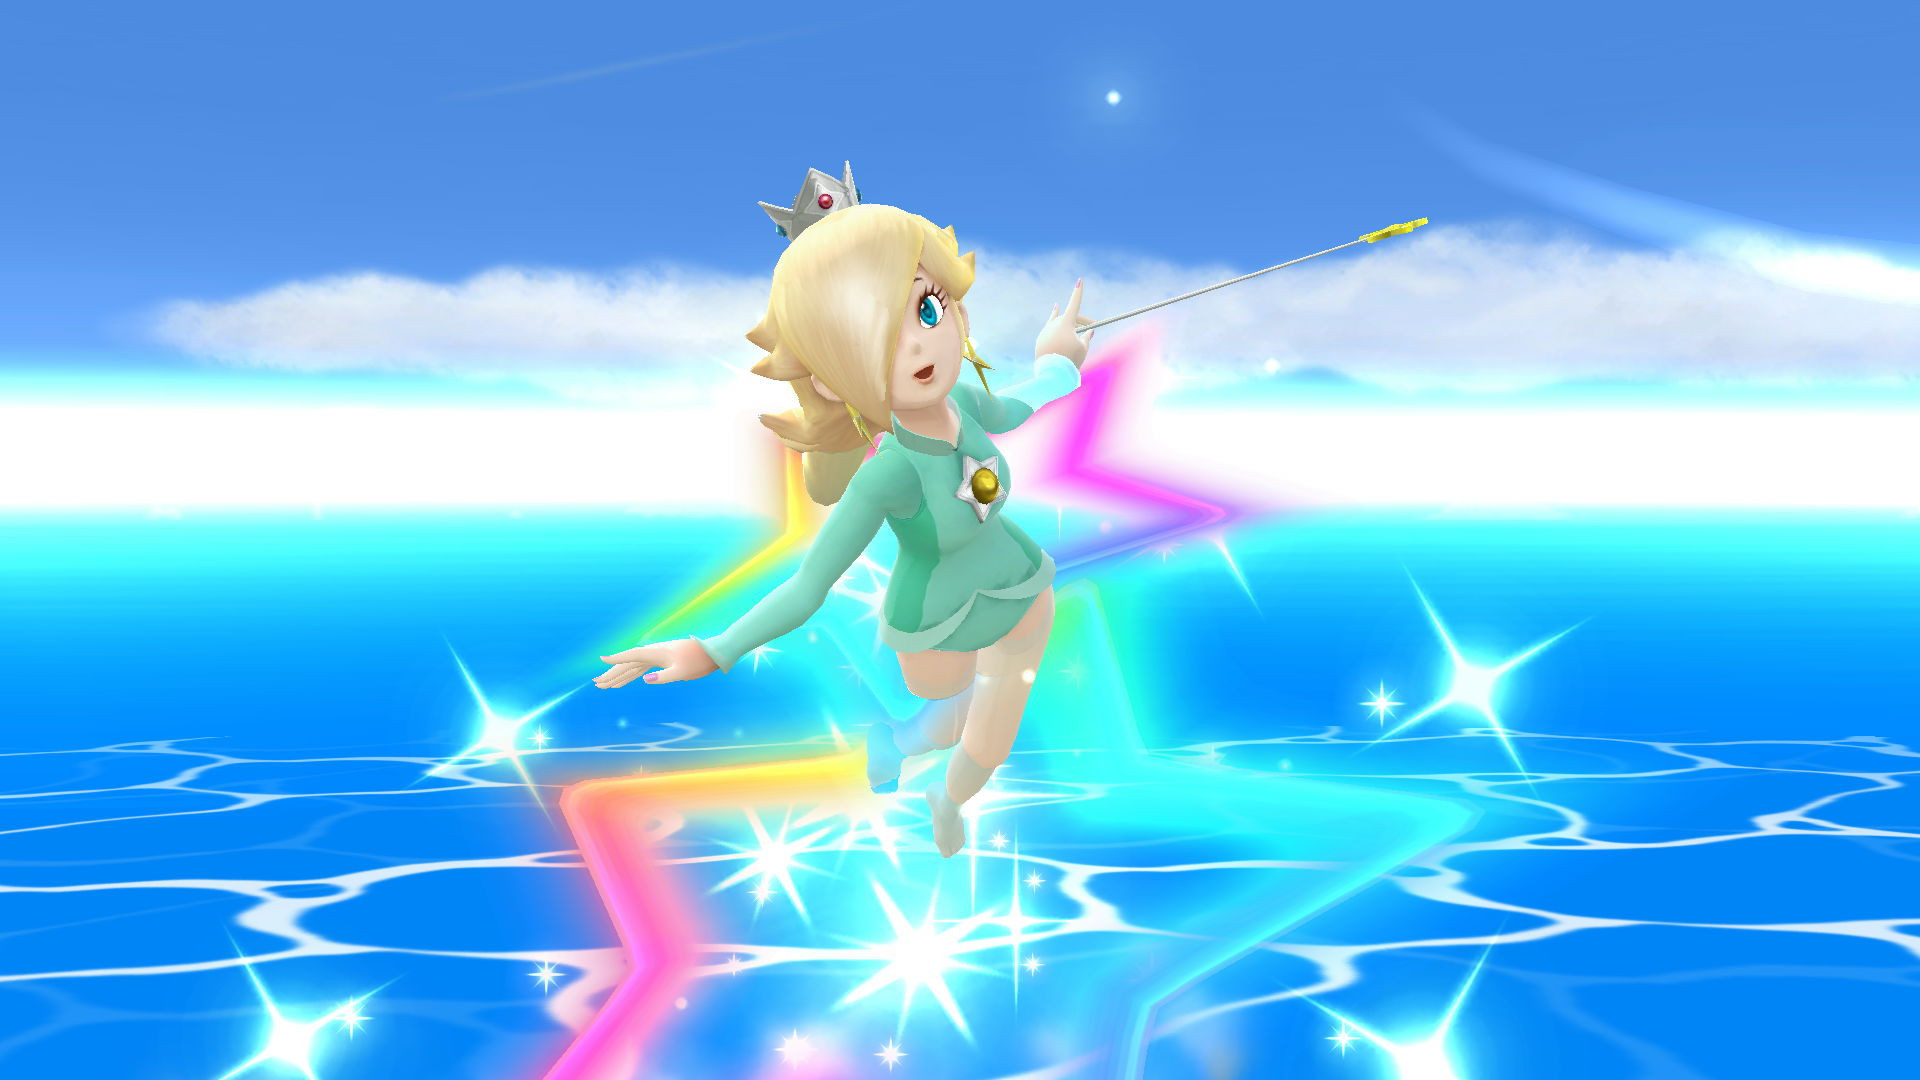 1920x1080 So the Olympic Rosalina mod was added on GameBanana. It looks really  dazzling, wearing an attire that shows off her curvy proportions and  essentially ...